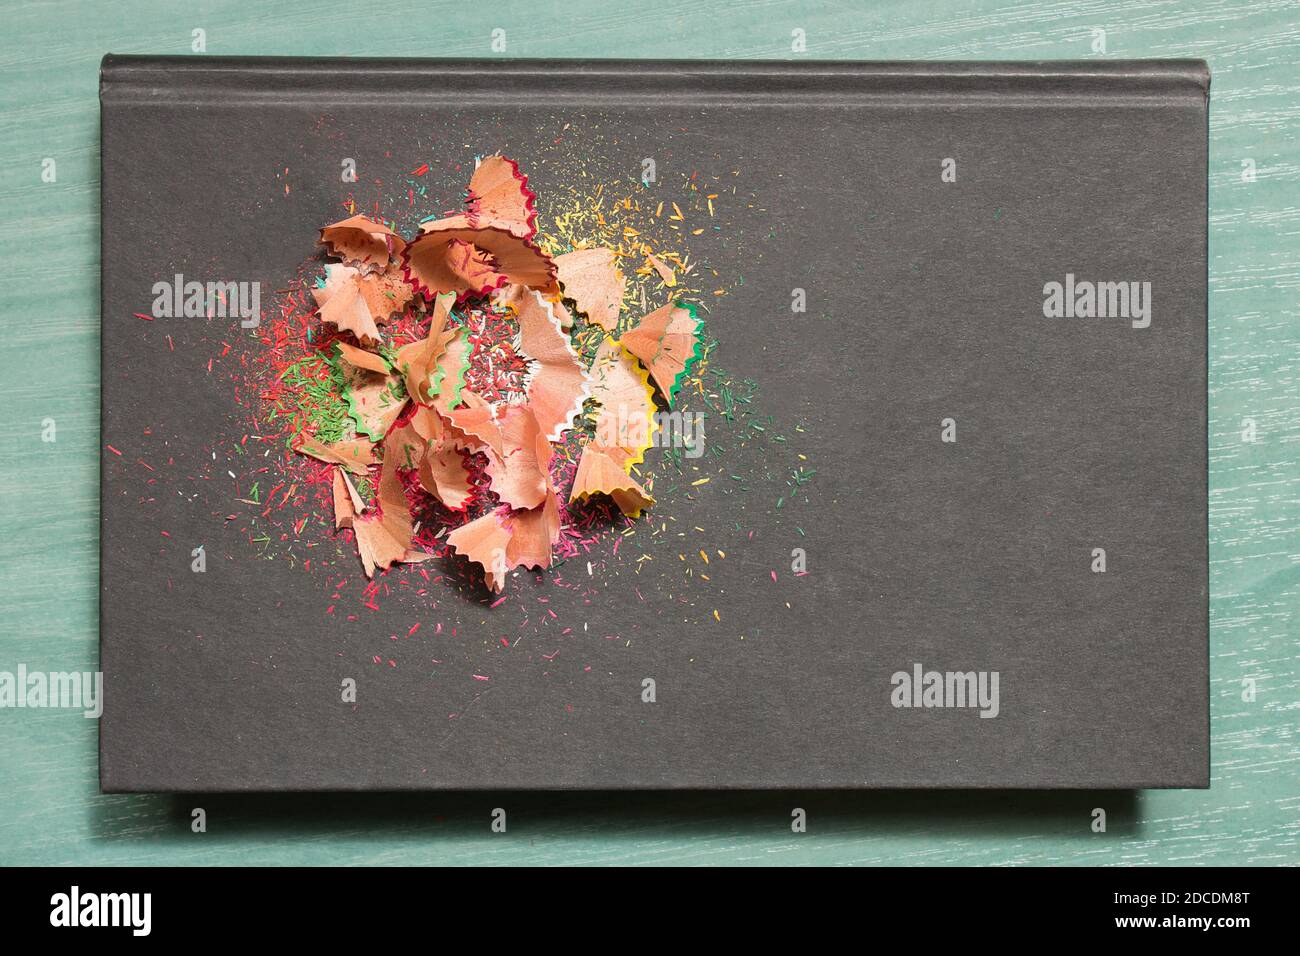 A book with colored pencil shavings on a classroom wooden table. Stock Photo